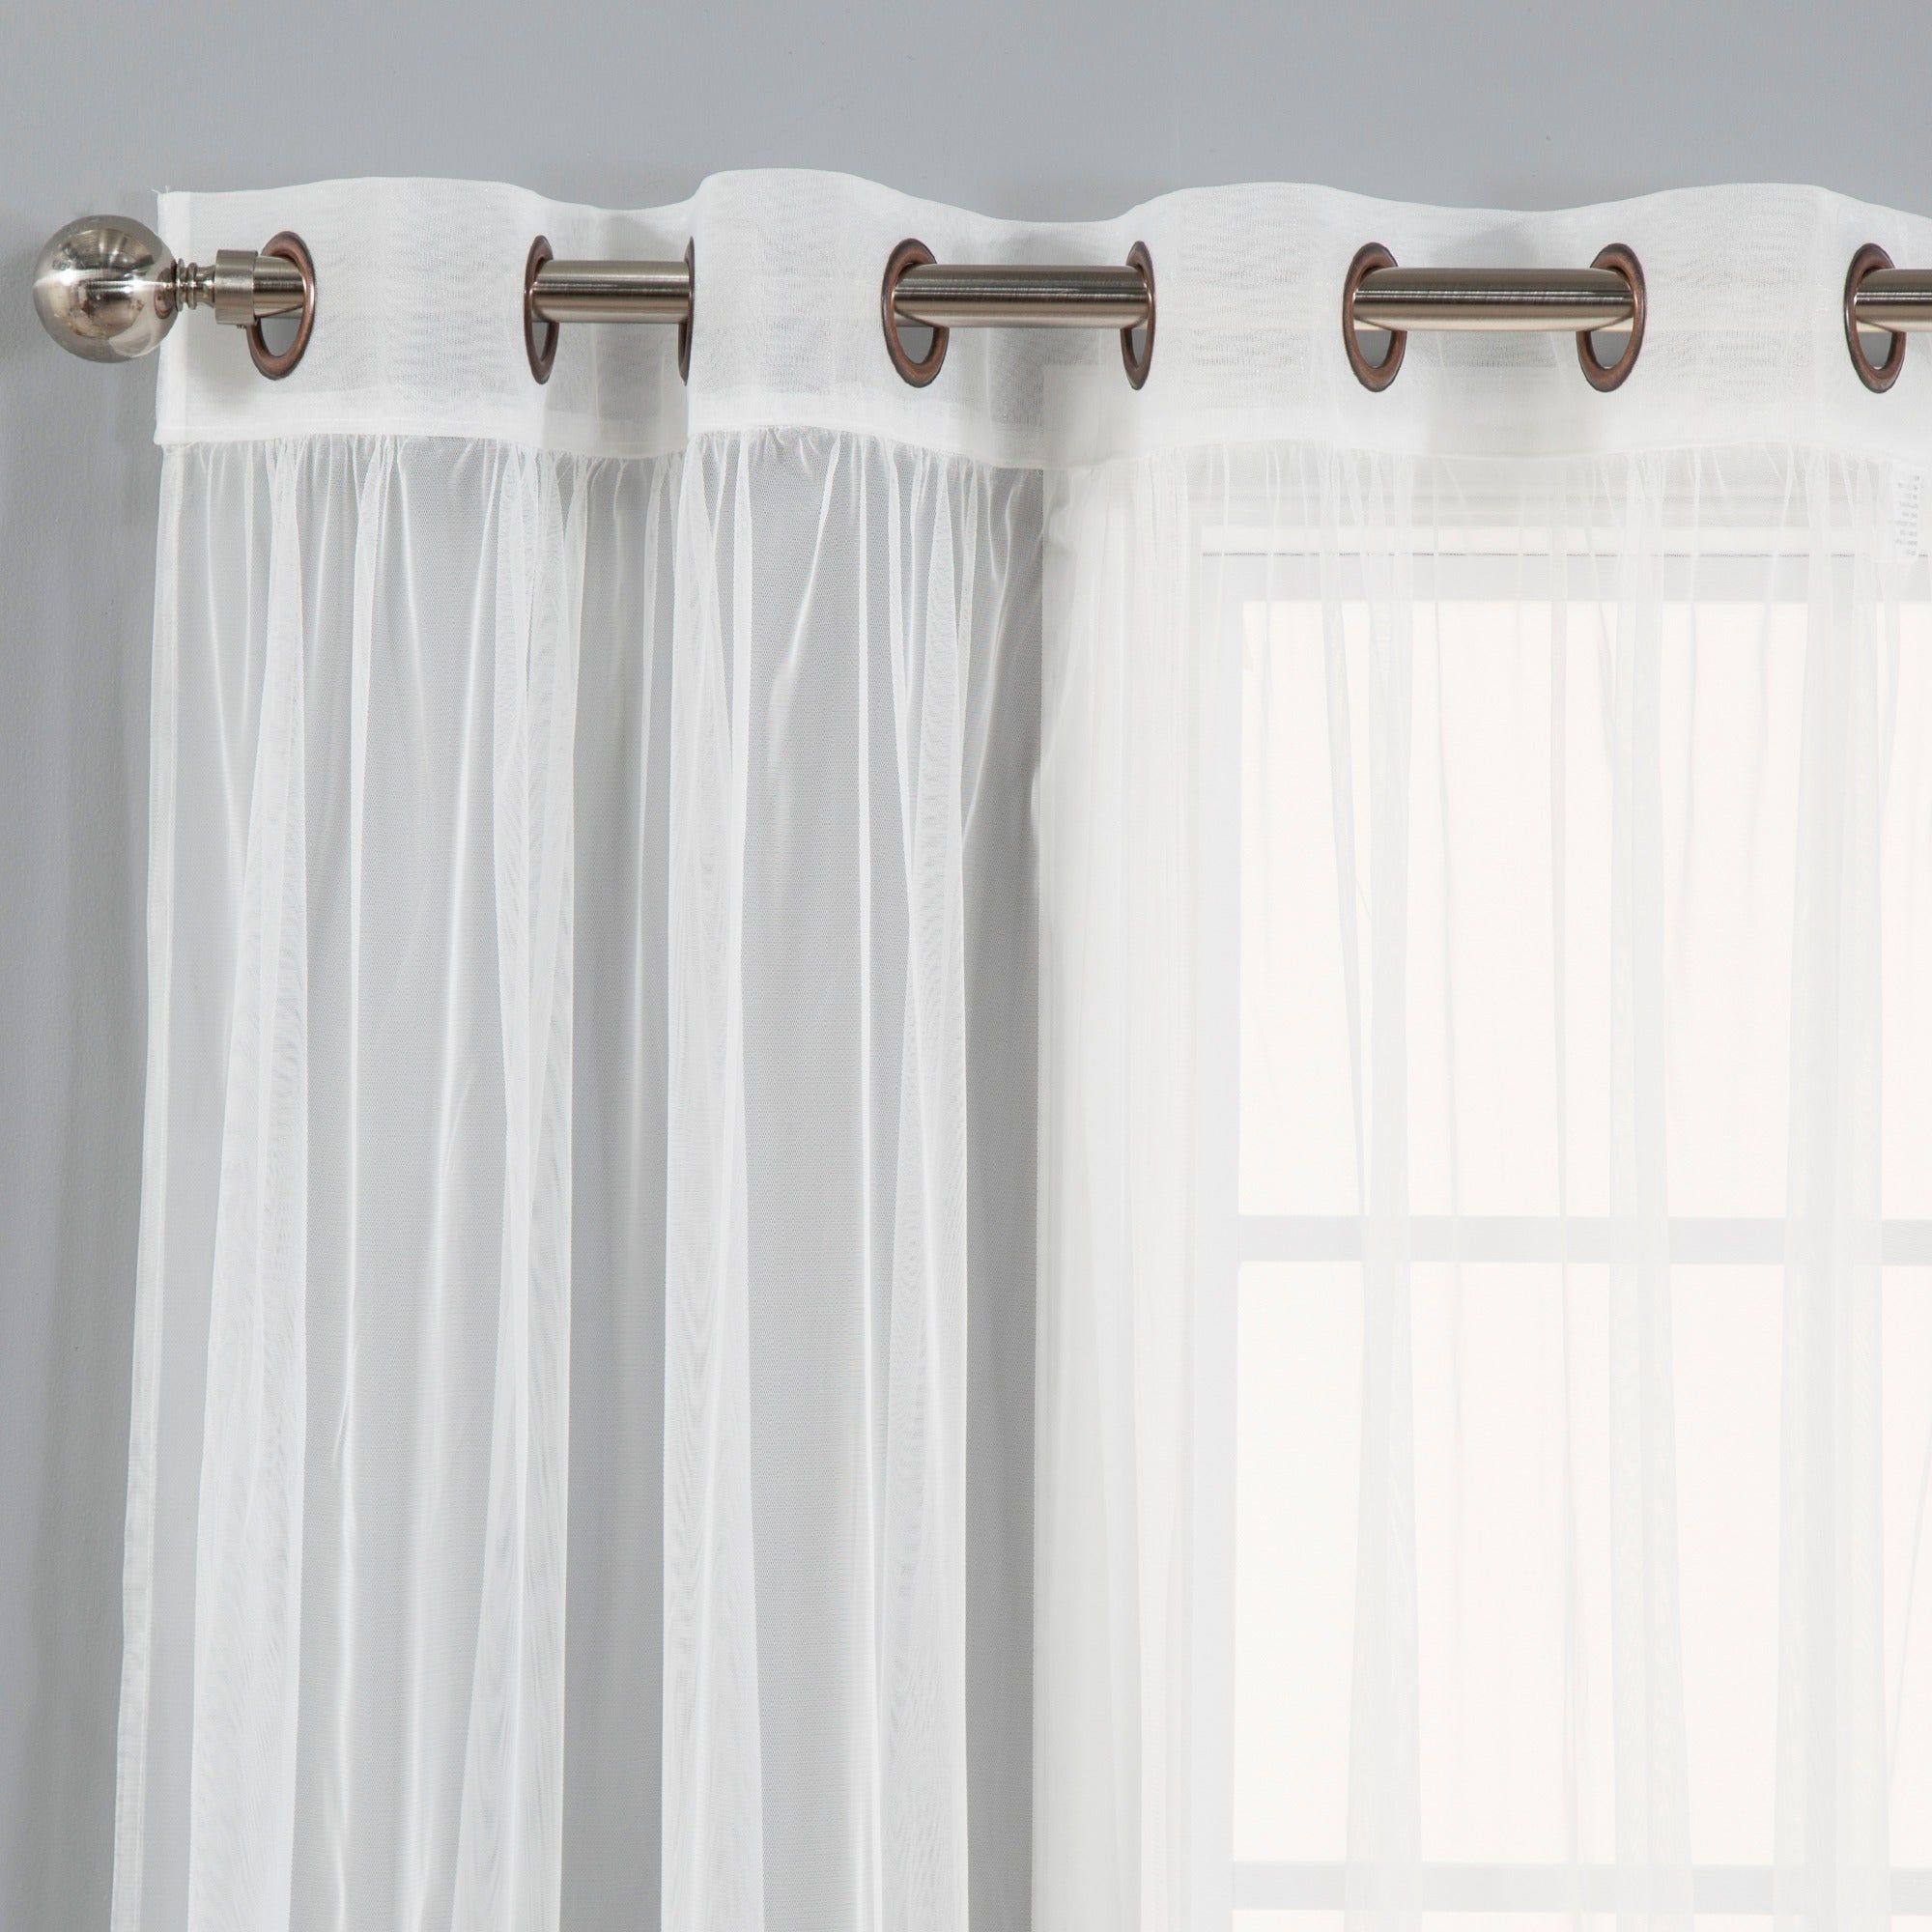 Aurora Home Mix & Match Blackout Tulle Lace Bronze Grommet 4 Piece Curtain  Panel Set Intended For Mix & Match Blackout Tulle Lace Bronze Grommet Curtain Panel Sets (View 18 of 20)